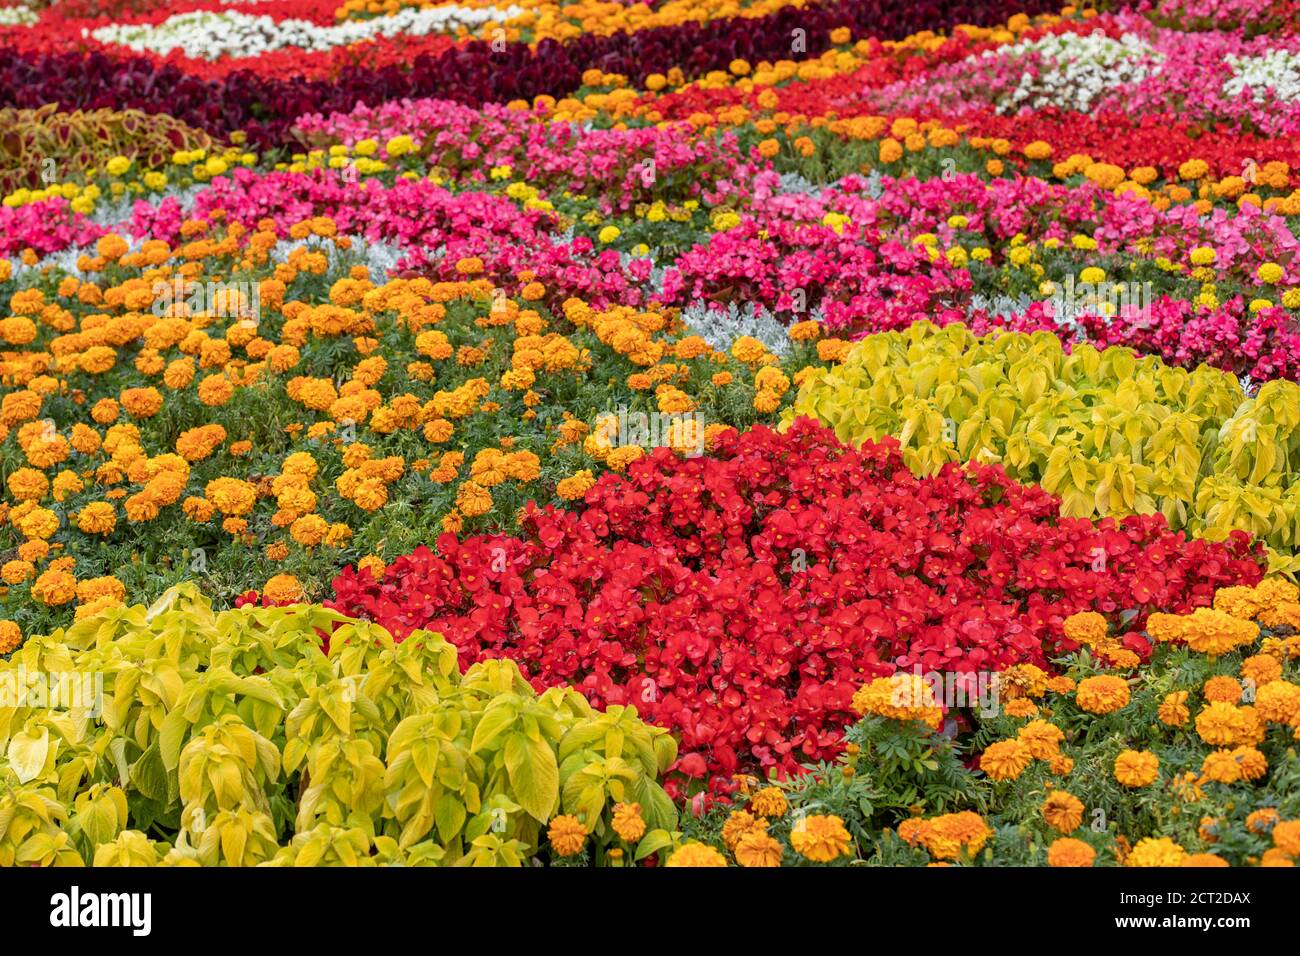 Geometric flower bed decoration, smoother squares with coleus, marigold ...